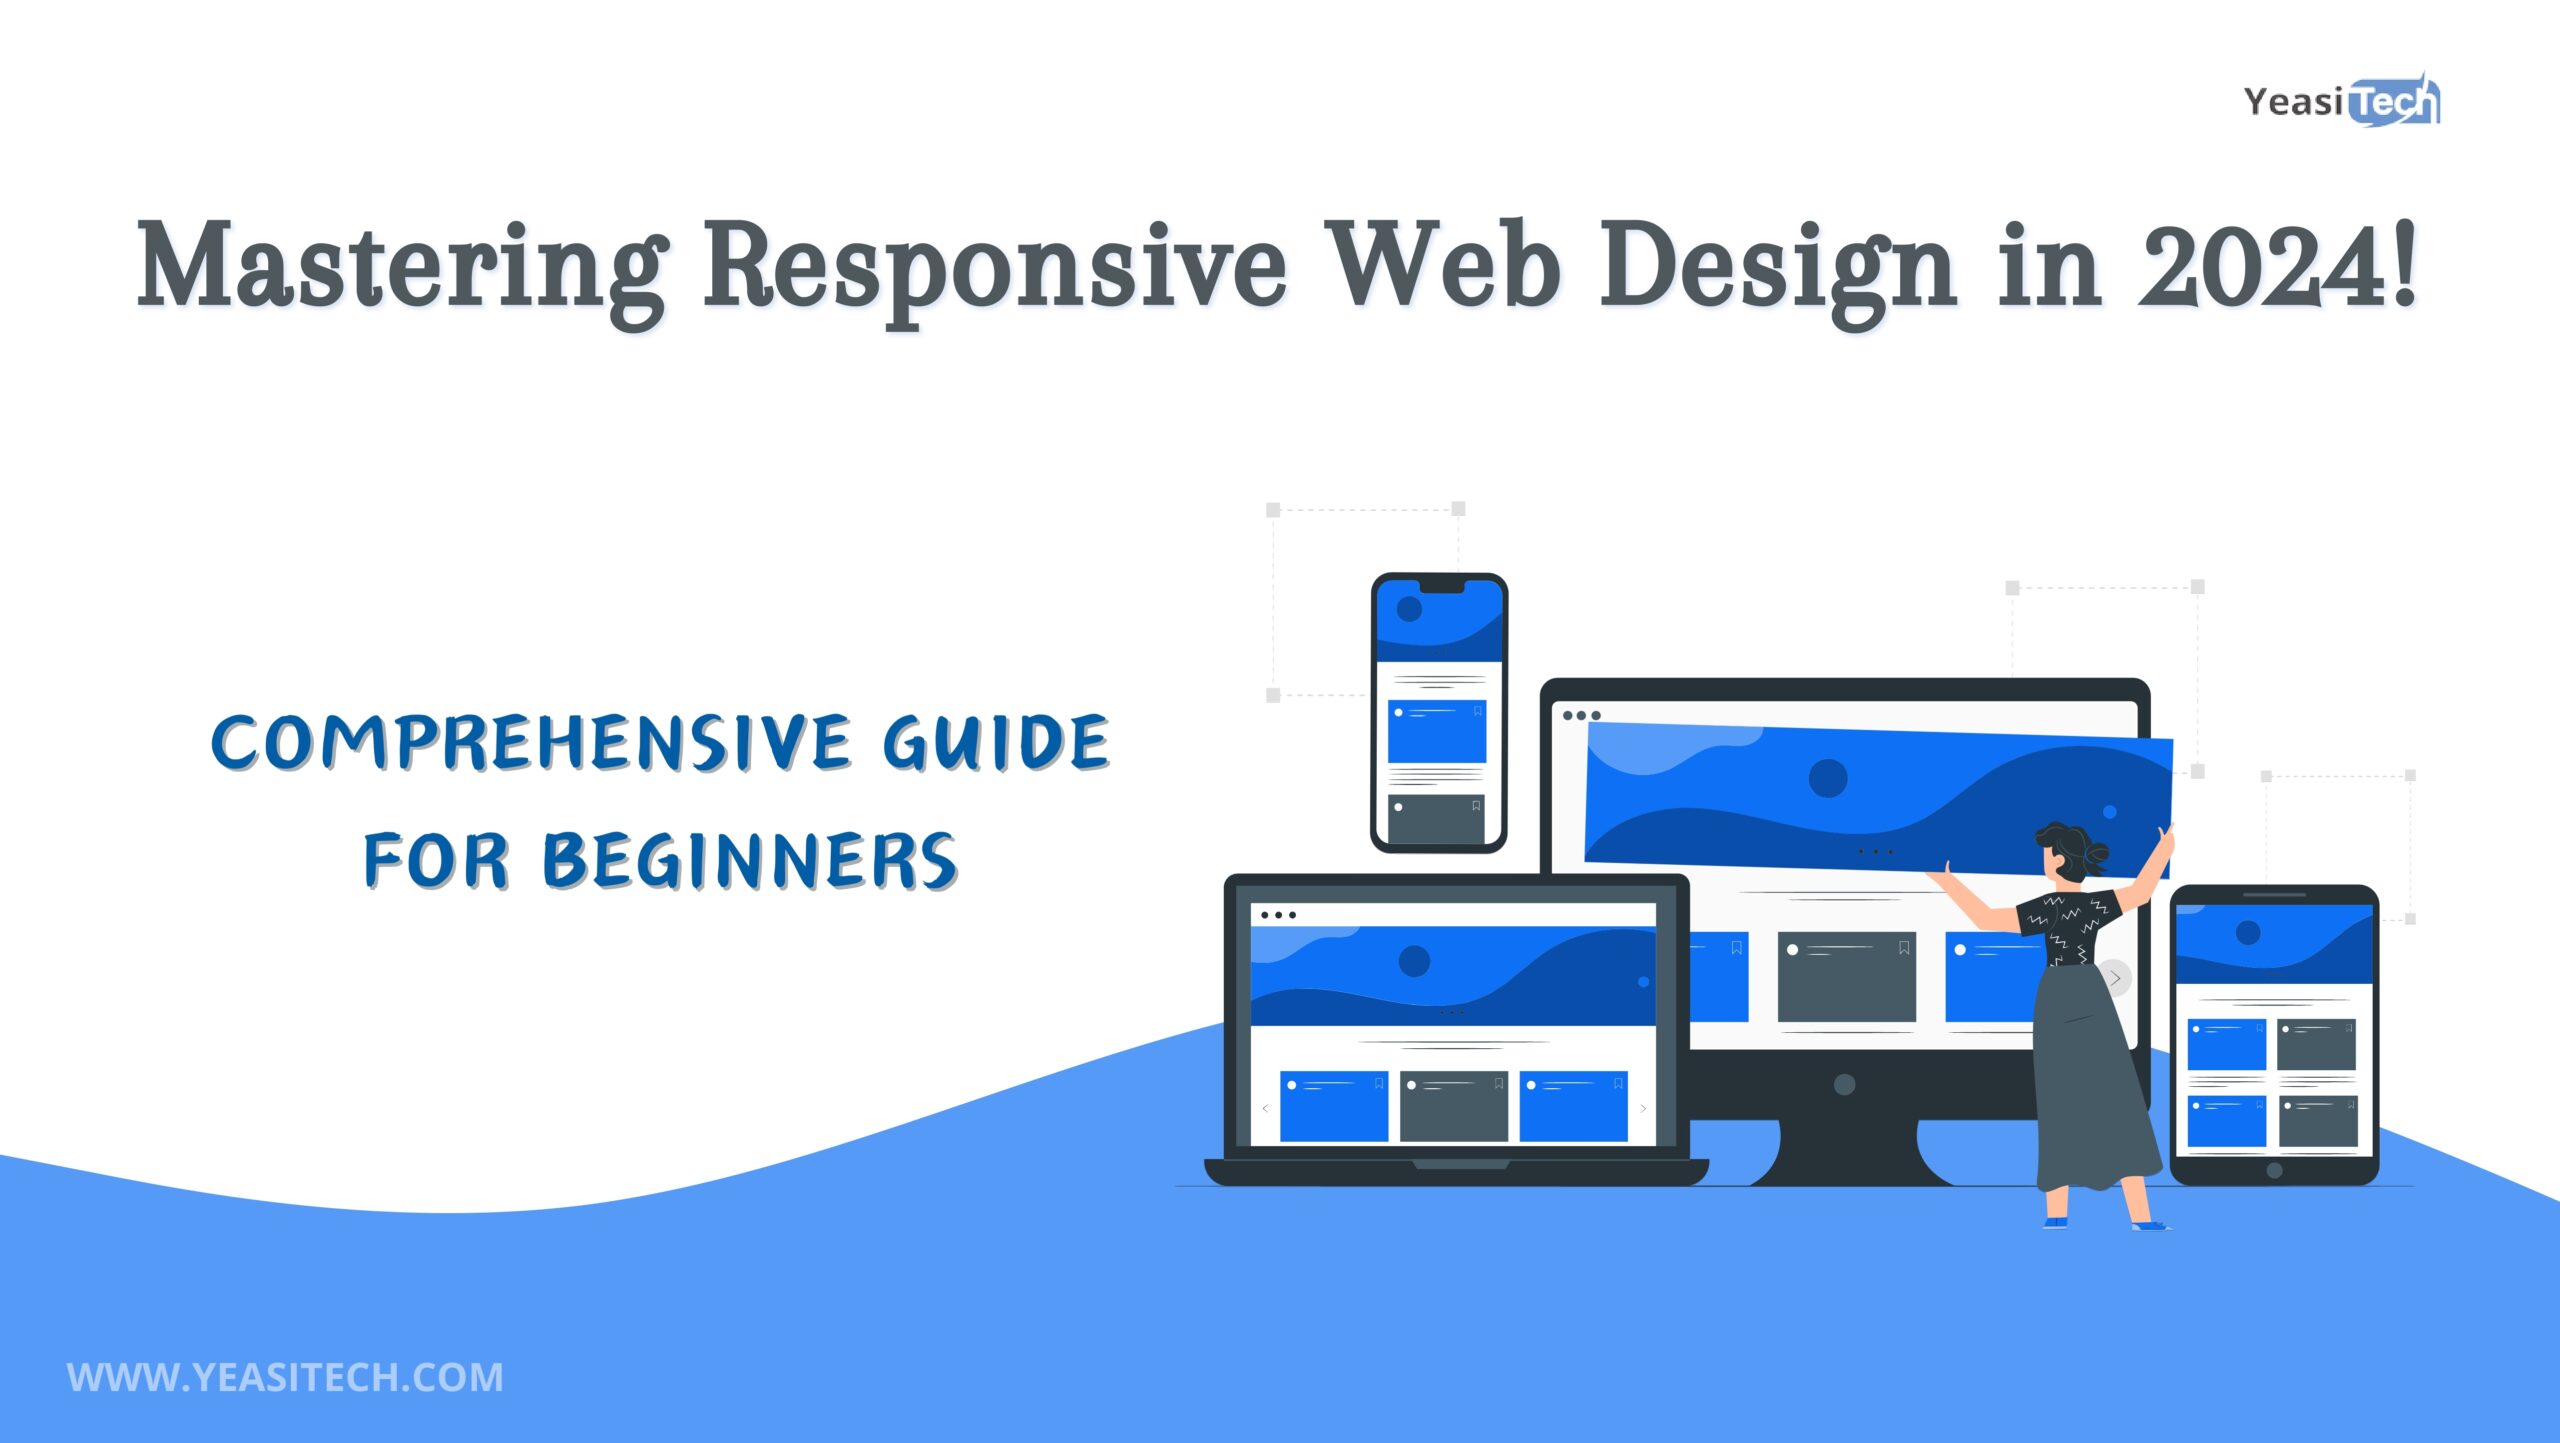 Mastering Responsive Web Design in 2024: A Comprehensive Guide for Beginners